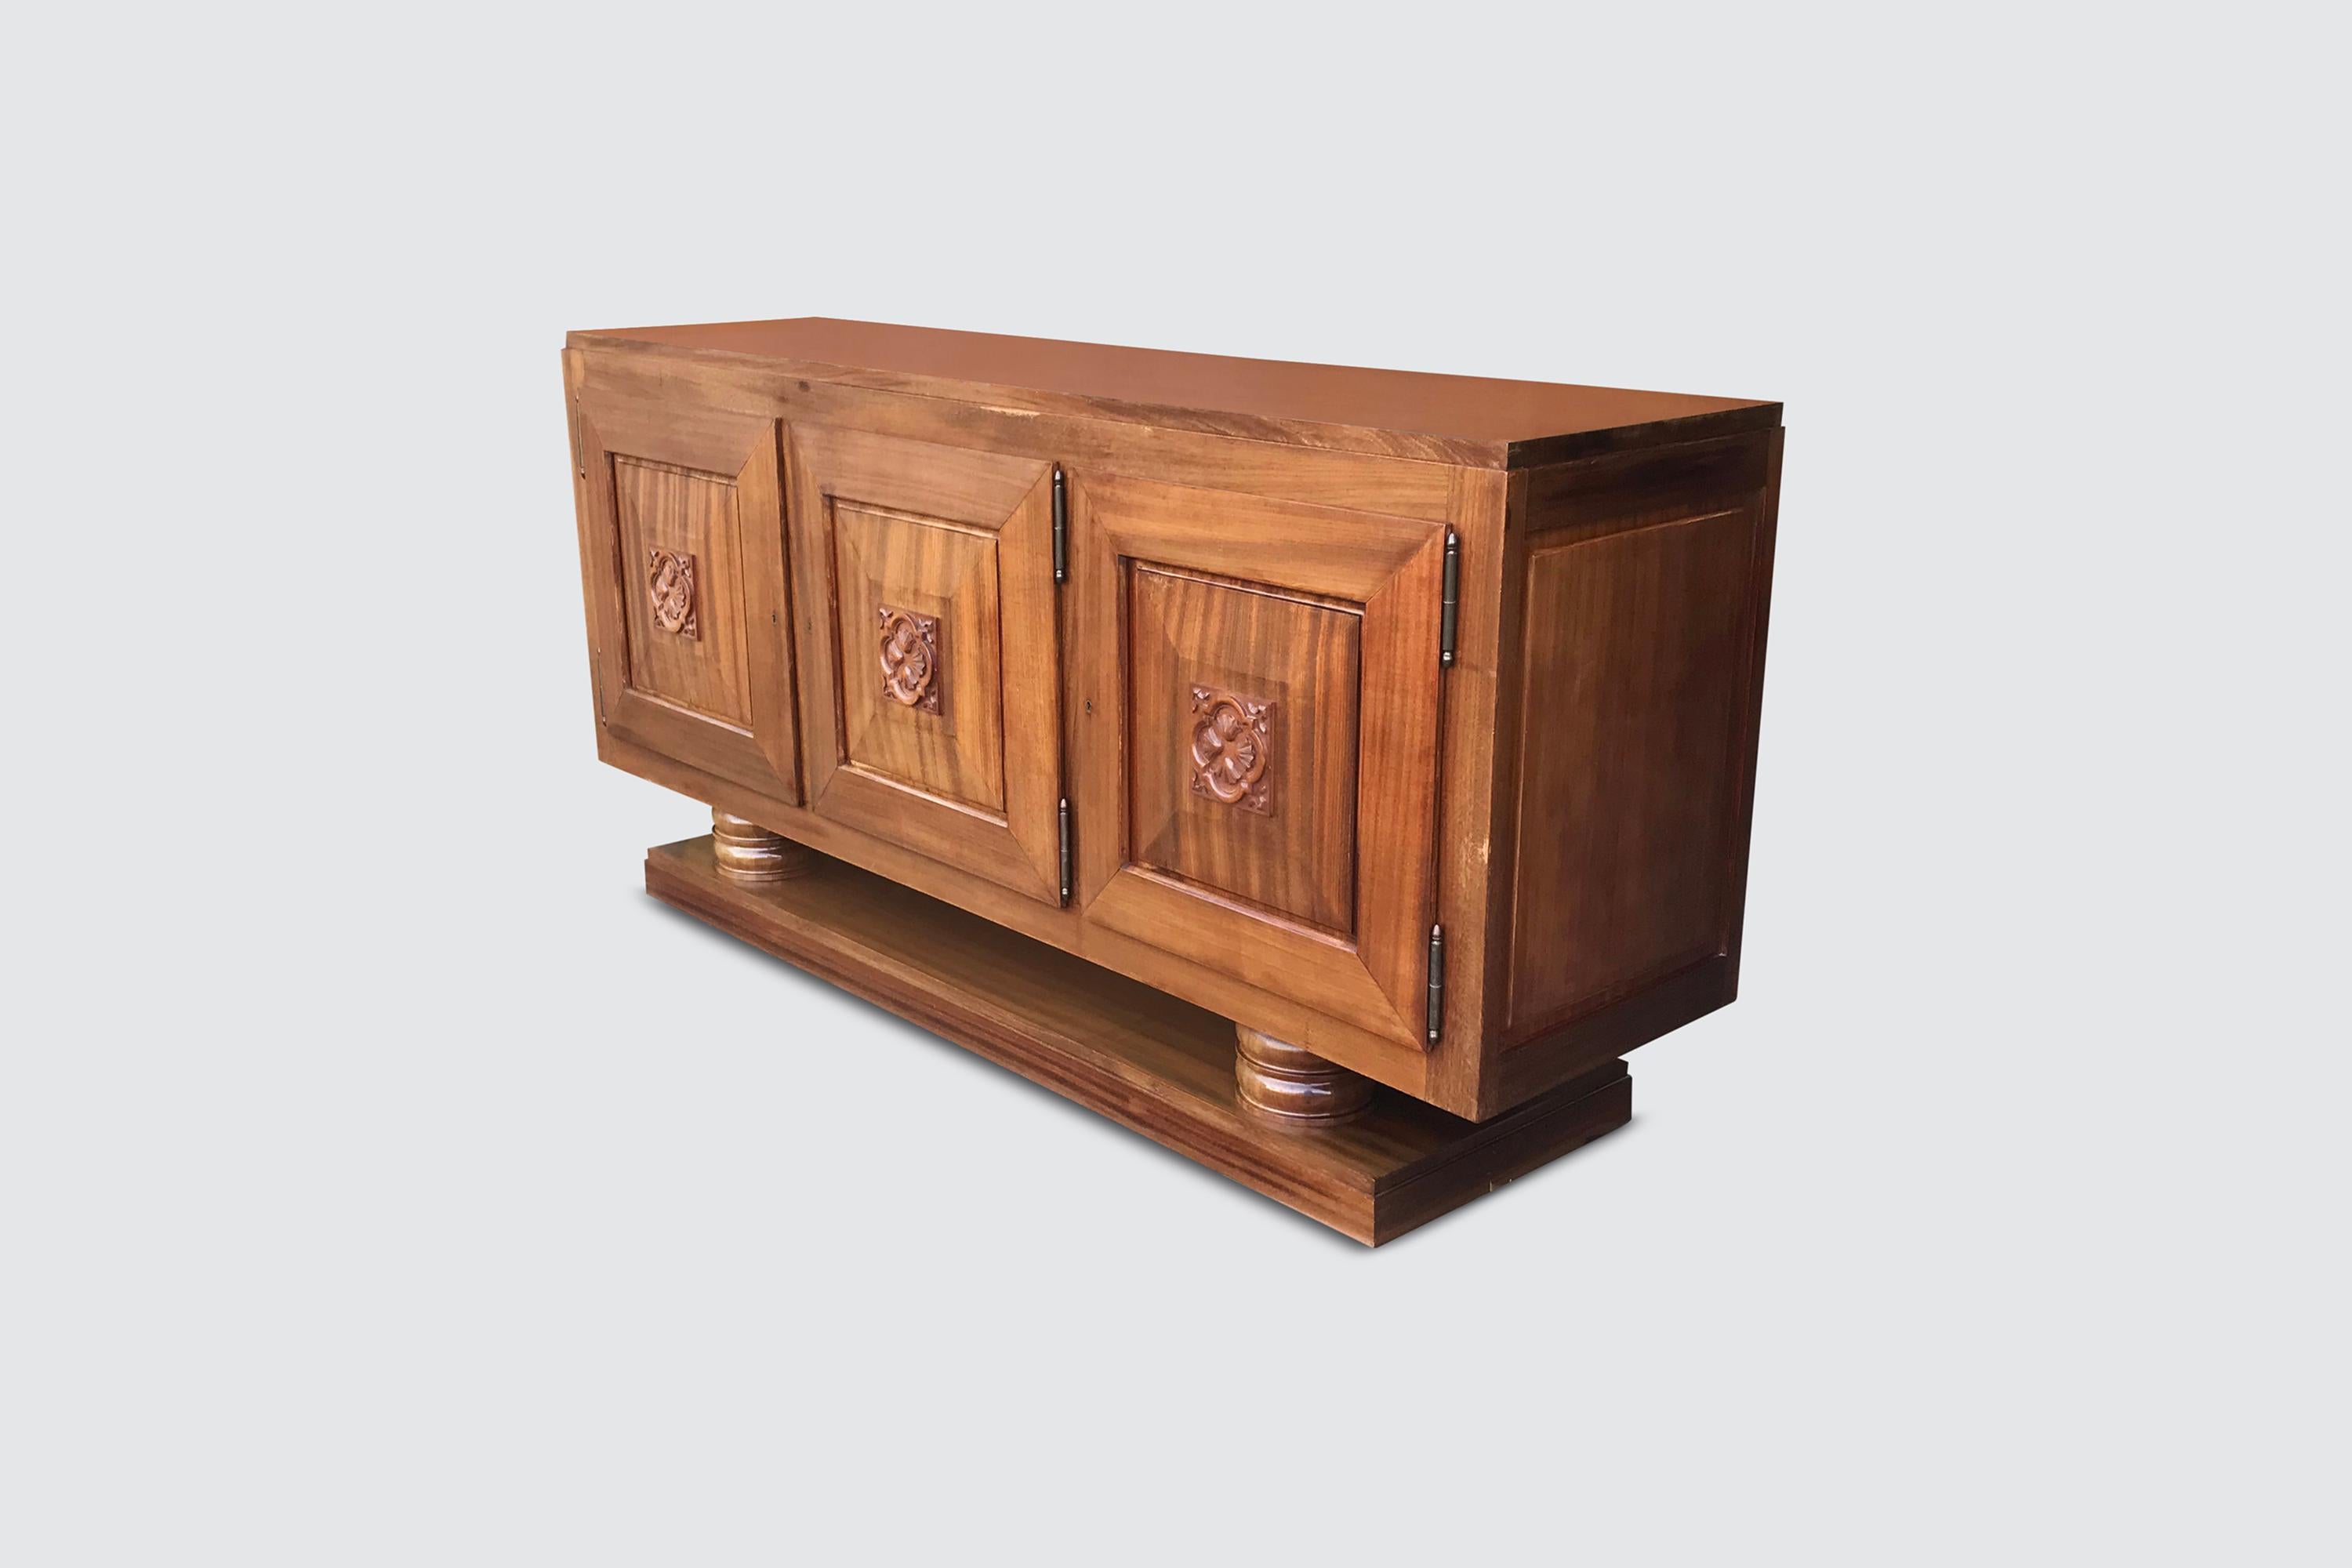 Sculpted Mahogany Art Deco Credenza by Gaston Poisson, France, 1930s For Sale 3